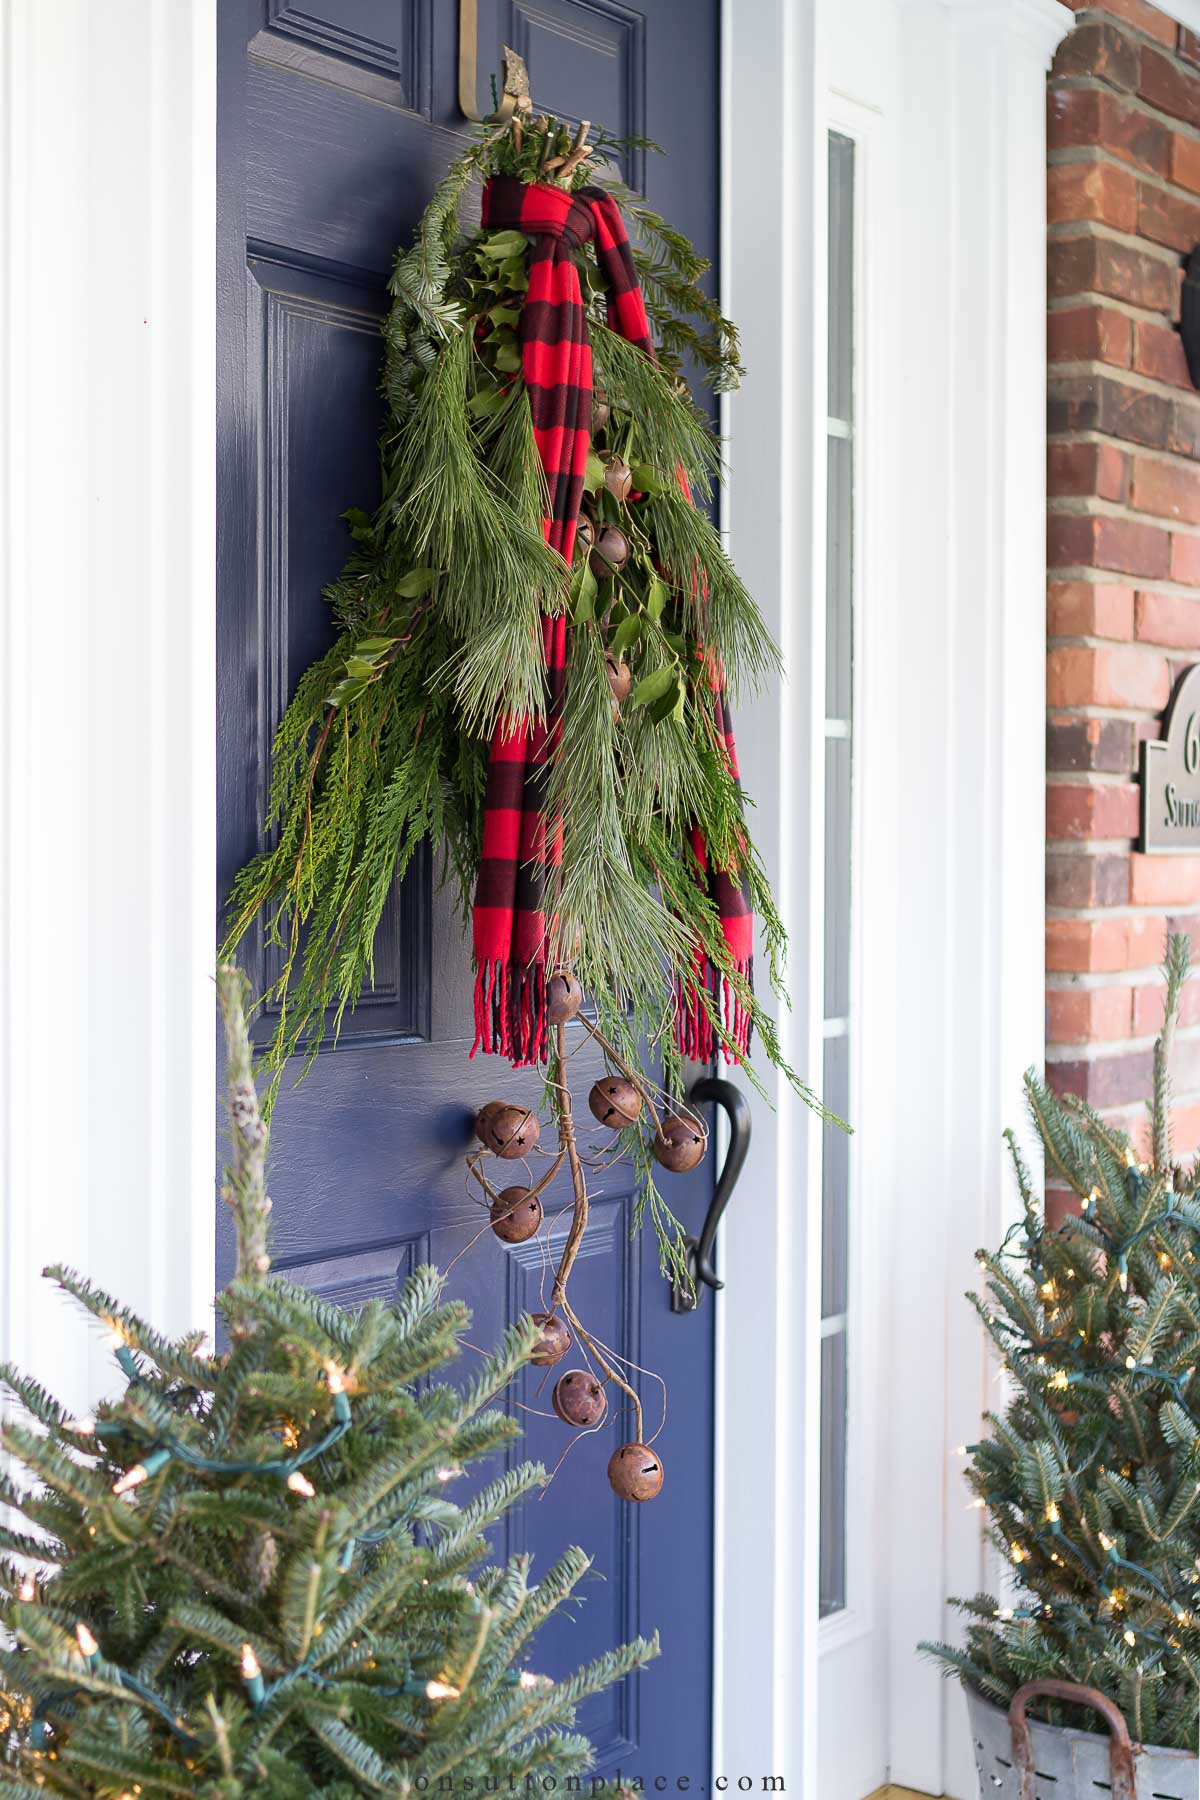 https://www.onsuttonplace.com/wp-content/uploads/2015/12/blue-front-door-with-evergreen-swag-2023.jpg